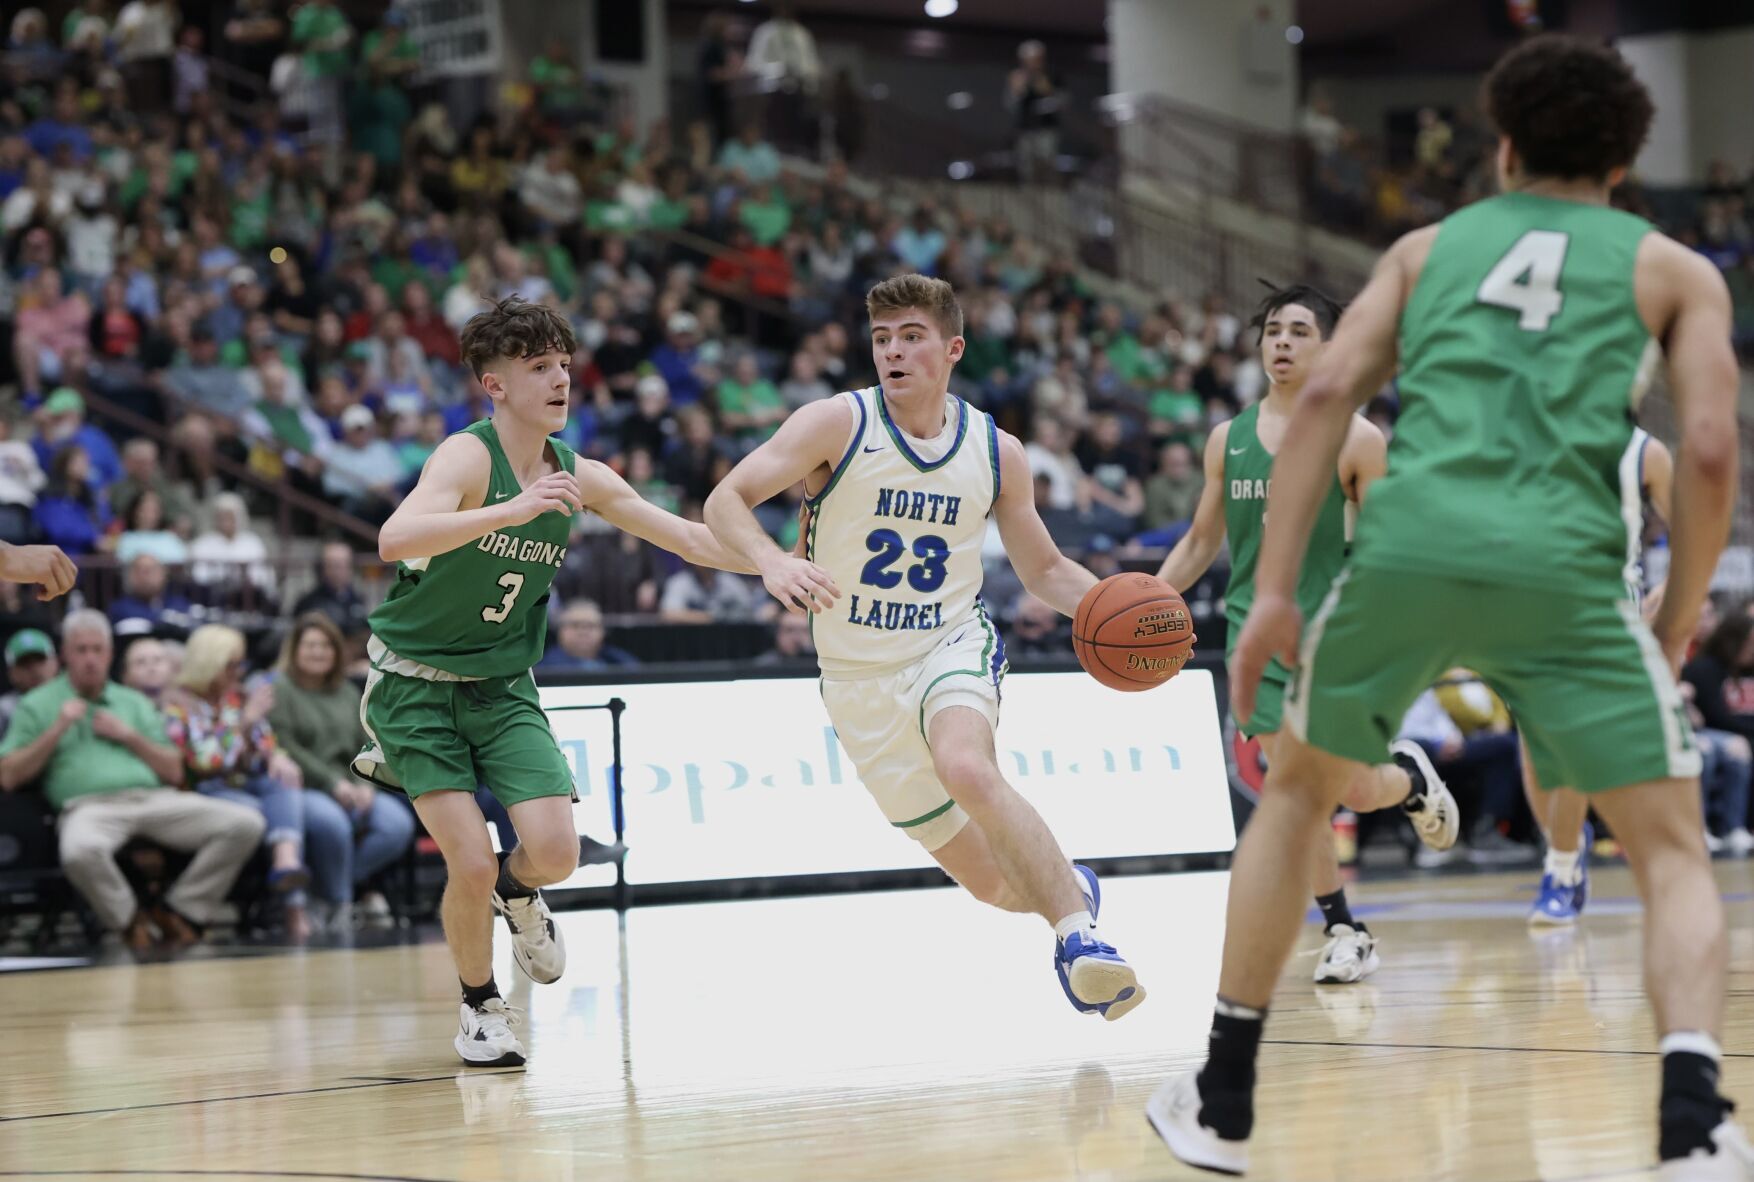 BOYS 49TH DISTRICT PREVIEW: Clay County looks to unseat reigning champion North Laurel